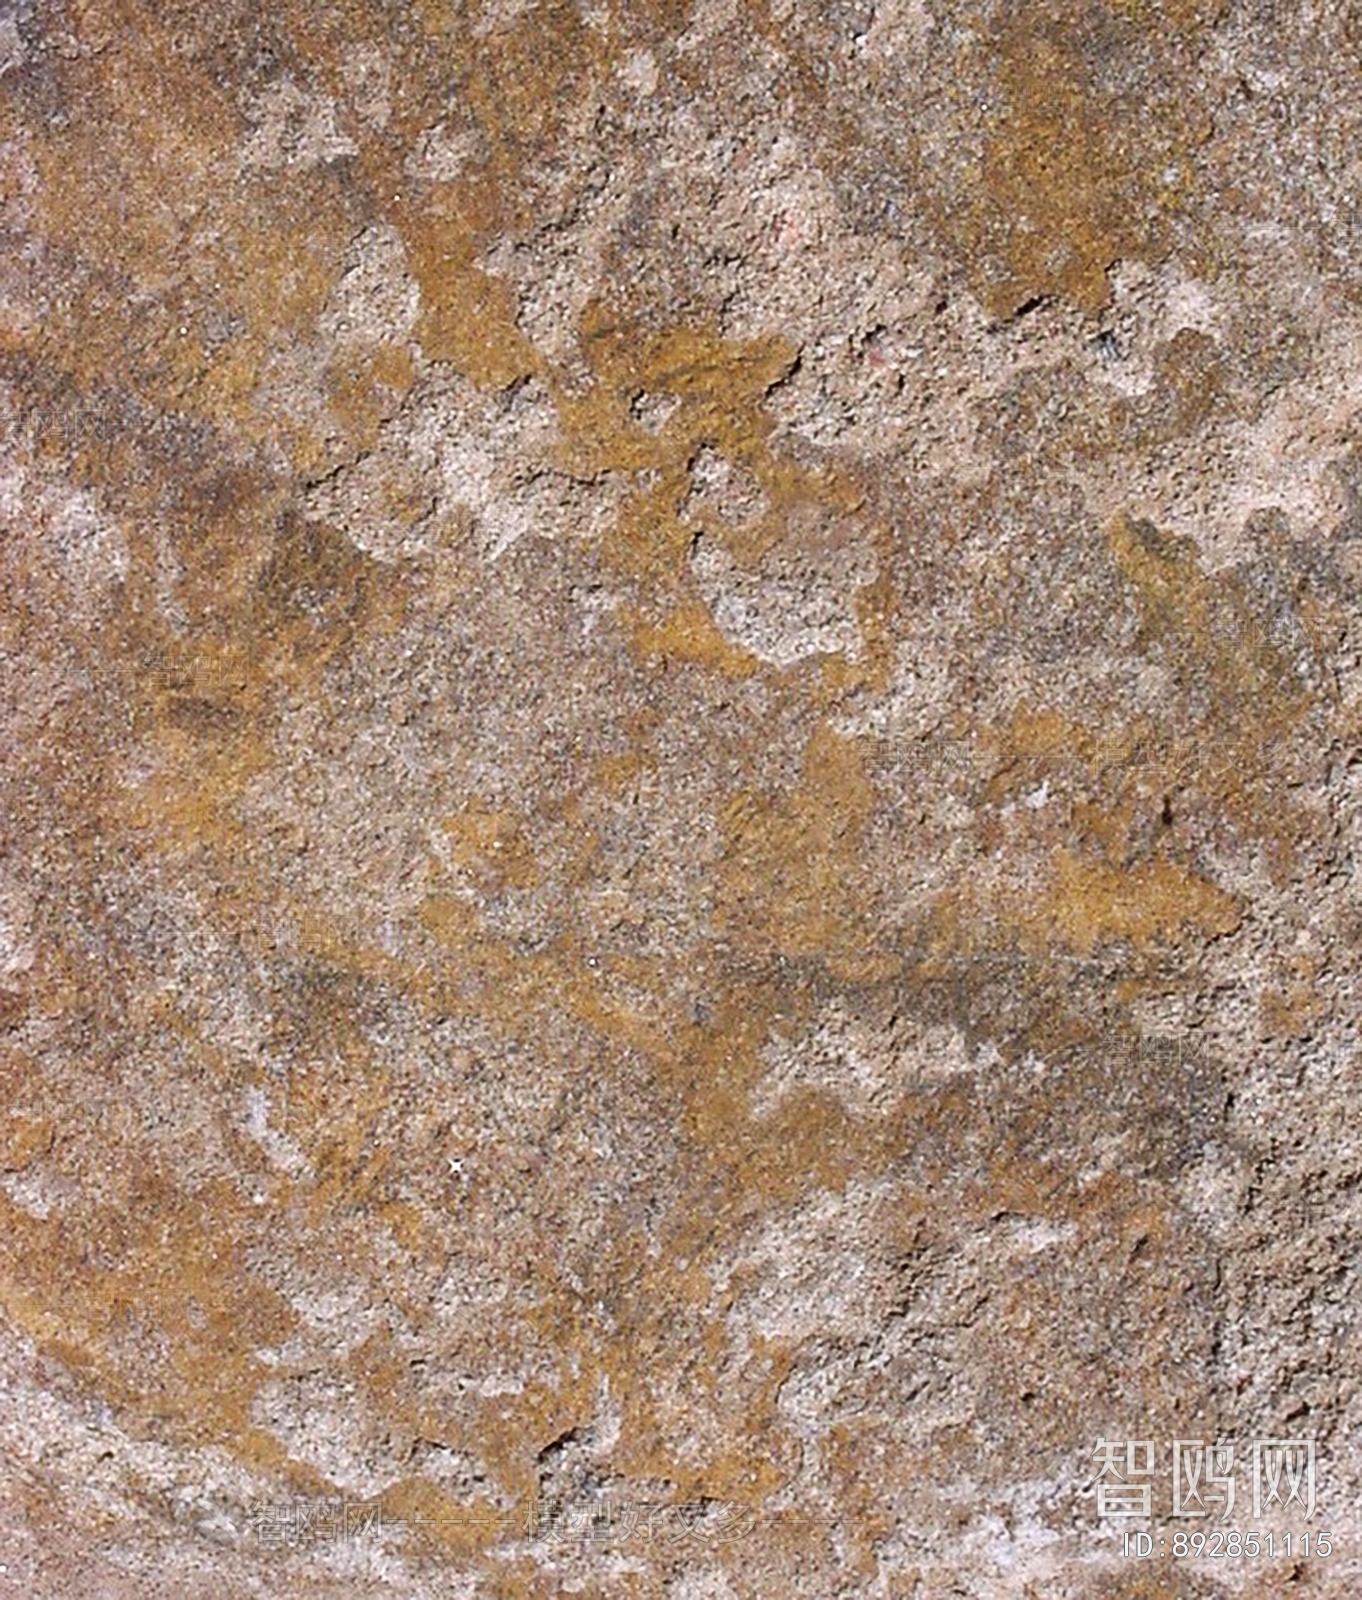 Other Stone Textures